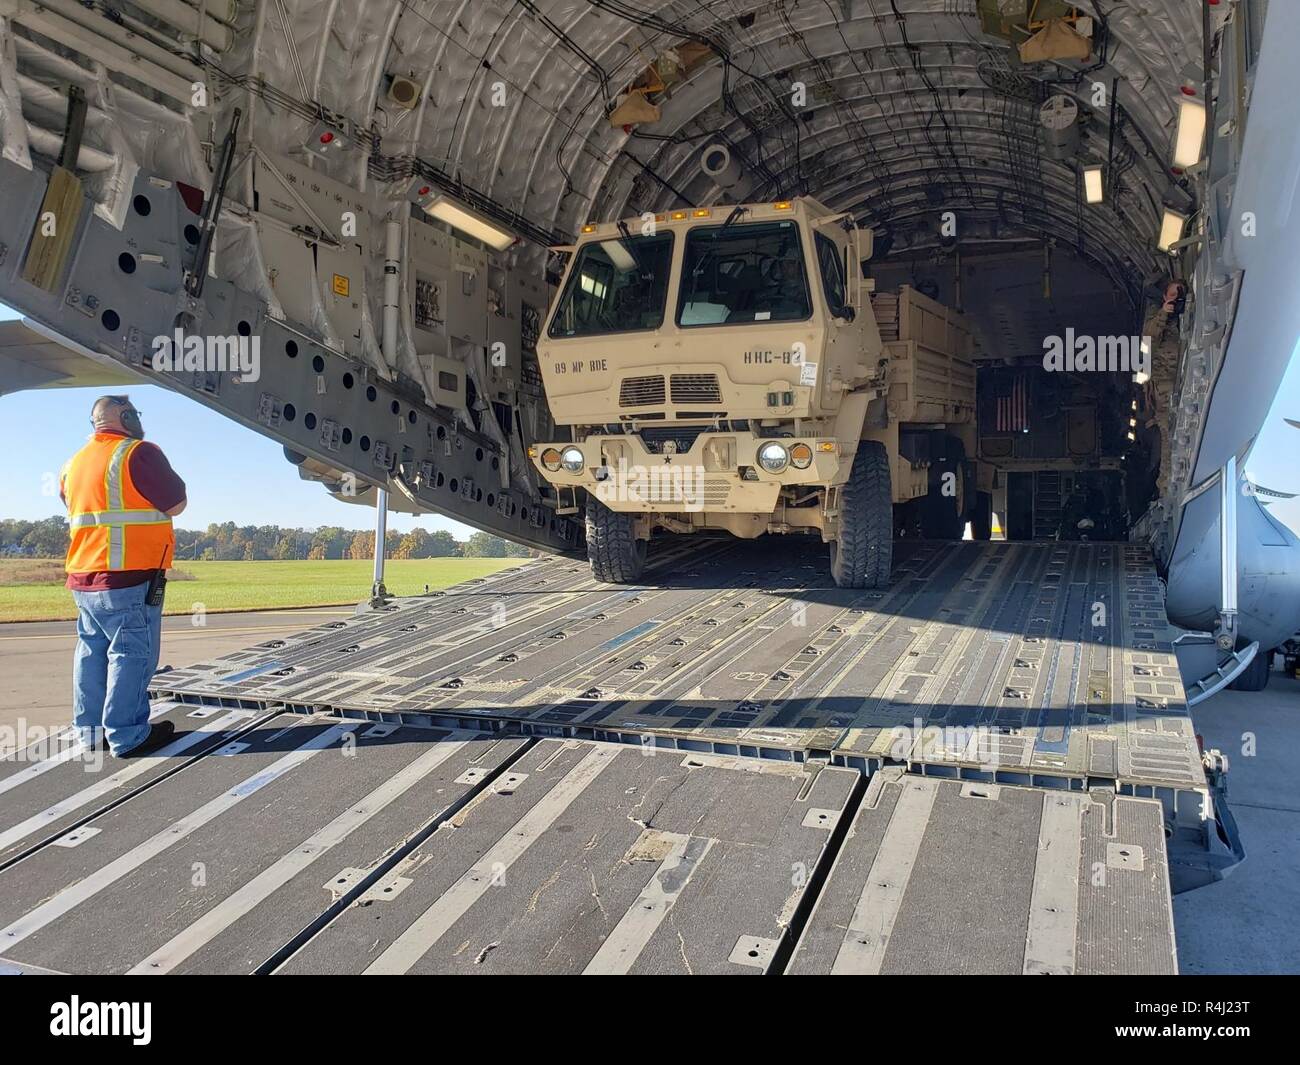 Richard Wolfe, Unit Movement Coordinator for Fort Knox, Kentucky, provides directions as Pfc. Emmanuel Cook, Headquarters and Headquarters Company, 89th Military Police Brigade, Task Force Griffin, loads a Light Medium Tactical Vehicle on a C-17 aircraft, October 29, 2018. Soldiers from Task Force Griffin are deploying to the Southwest Border Region to support and enable Department of Homeland Security and other law enforcement agencies as they conduct coordinated efforts to secure our southwest border. Stock Photo